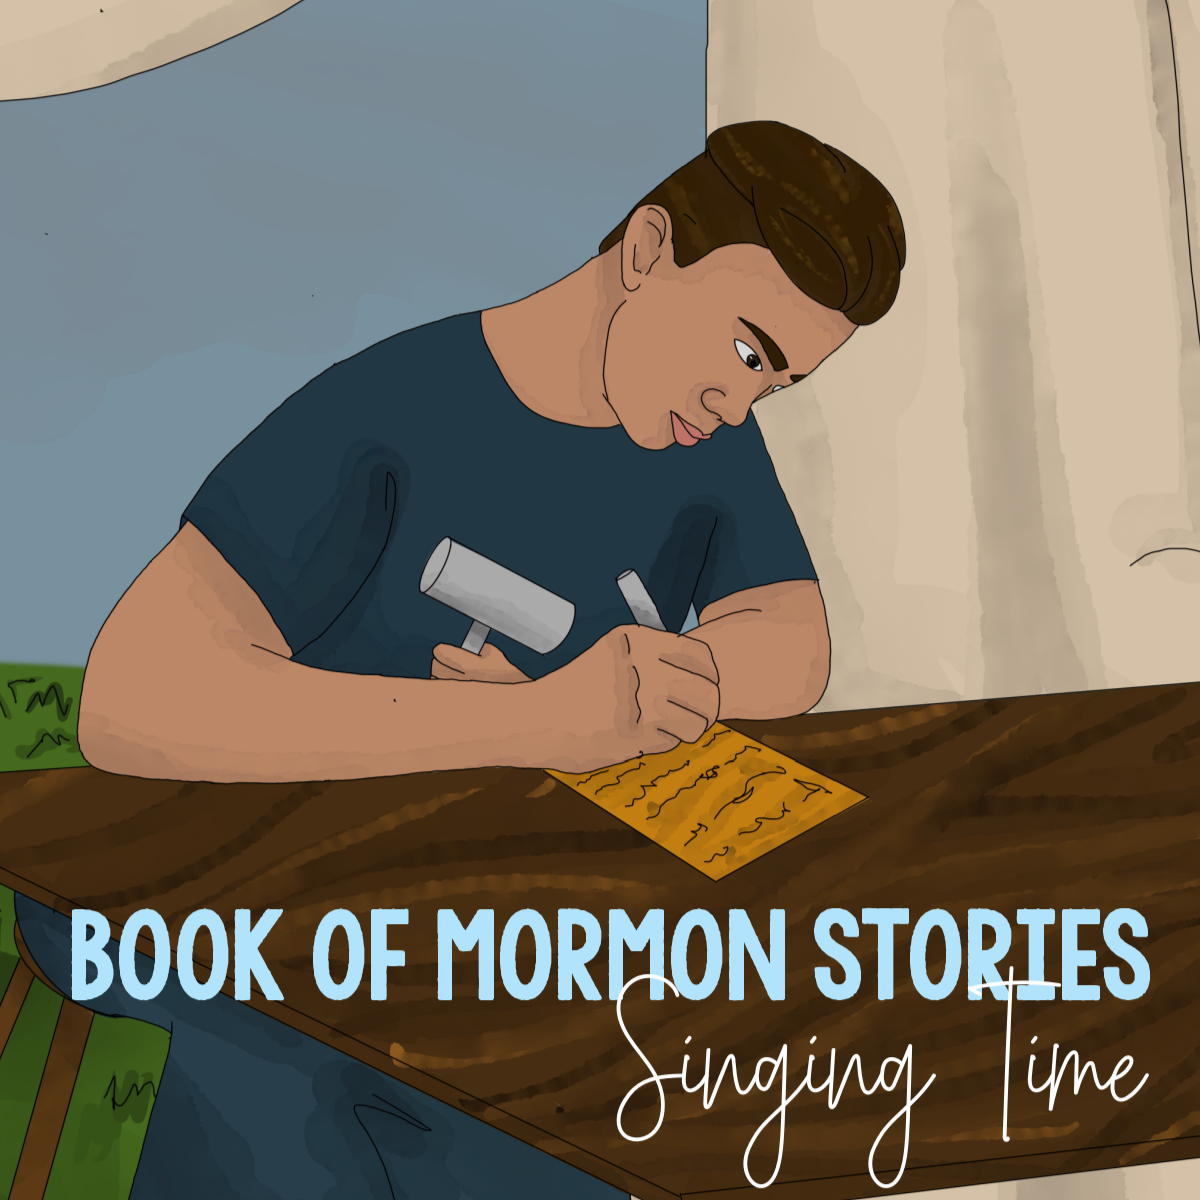 Book of Mormon Stories singing time ideas - Includes printable lesson plans and song helps for LDS Primary music leaders. Teach this song with an ancient code, directional movement, action words, jingle & shake, pick a verse, arrange the melody, and more fun teaching ideas for Come Follow Me in Primary and at home.